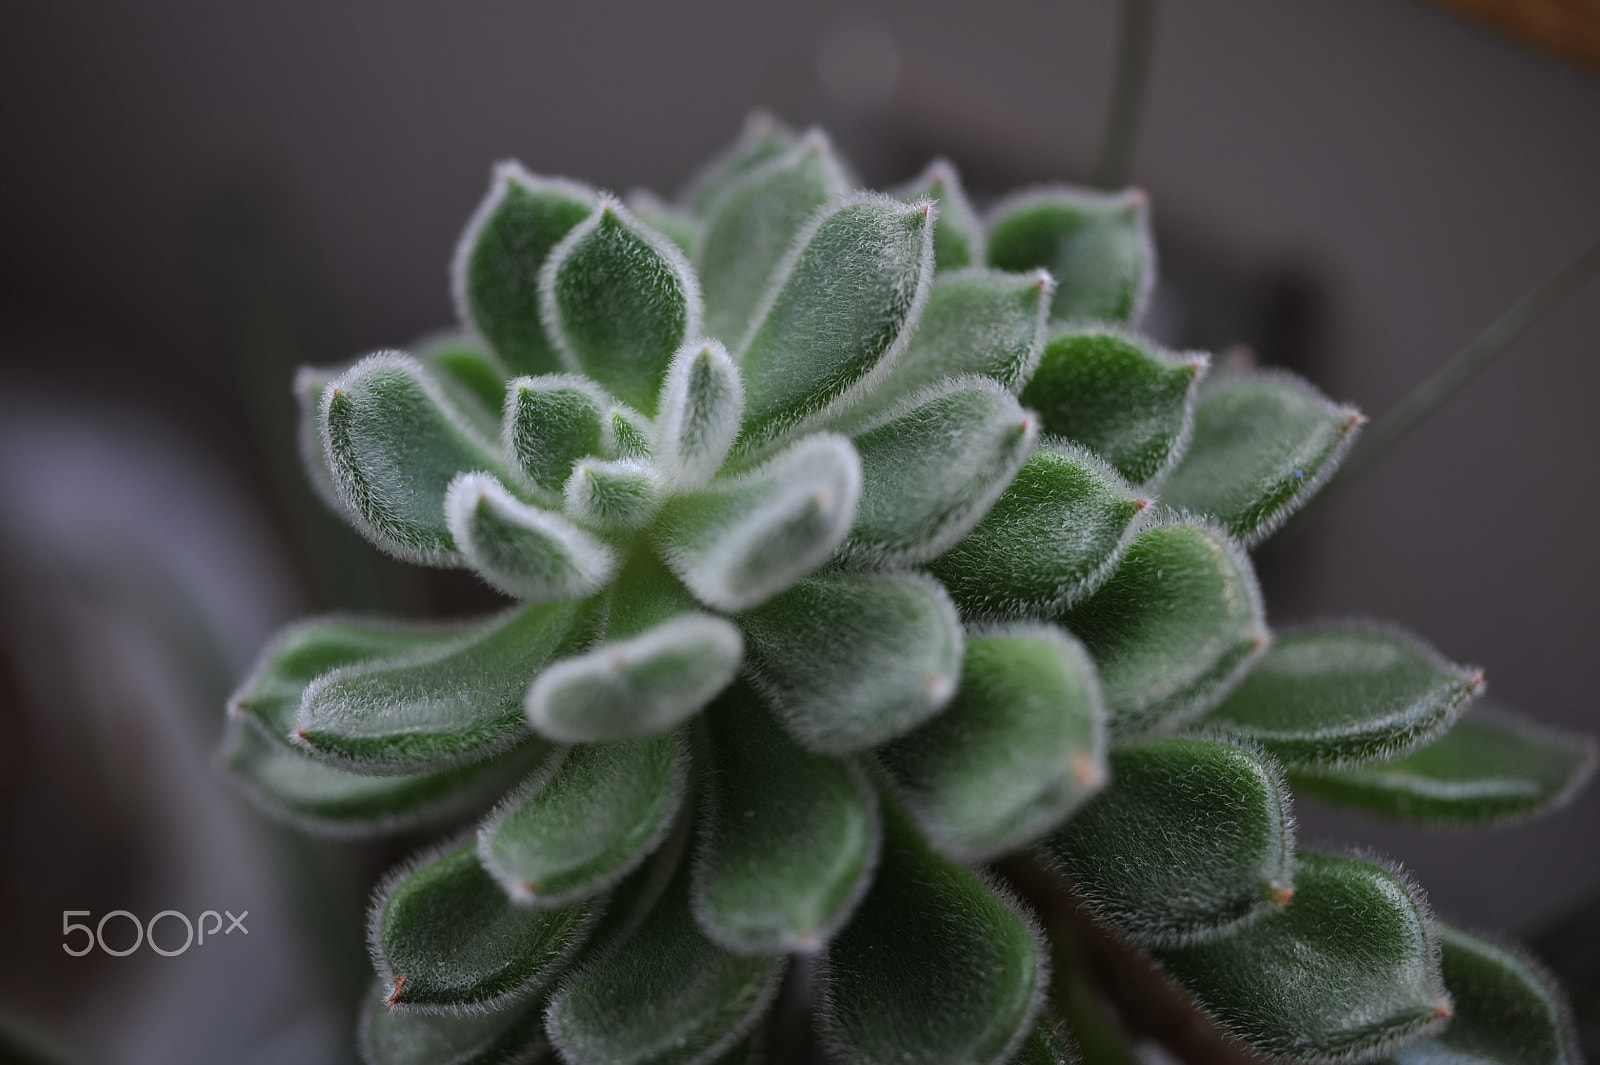 Nikon D700 + AF Micro-Nikkor 55mm f/2.8 sample photo. Fuzzy succulents photography